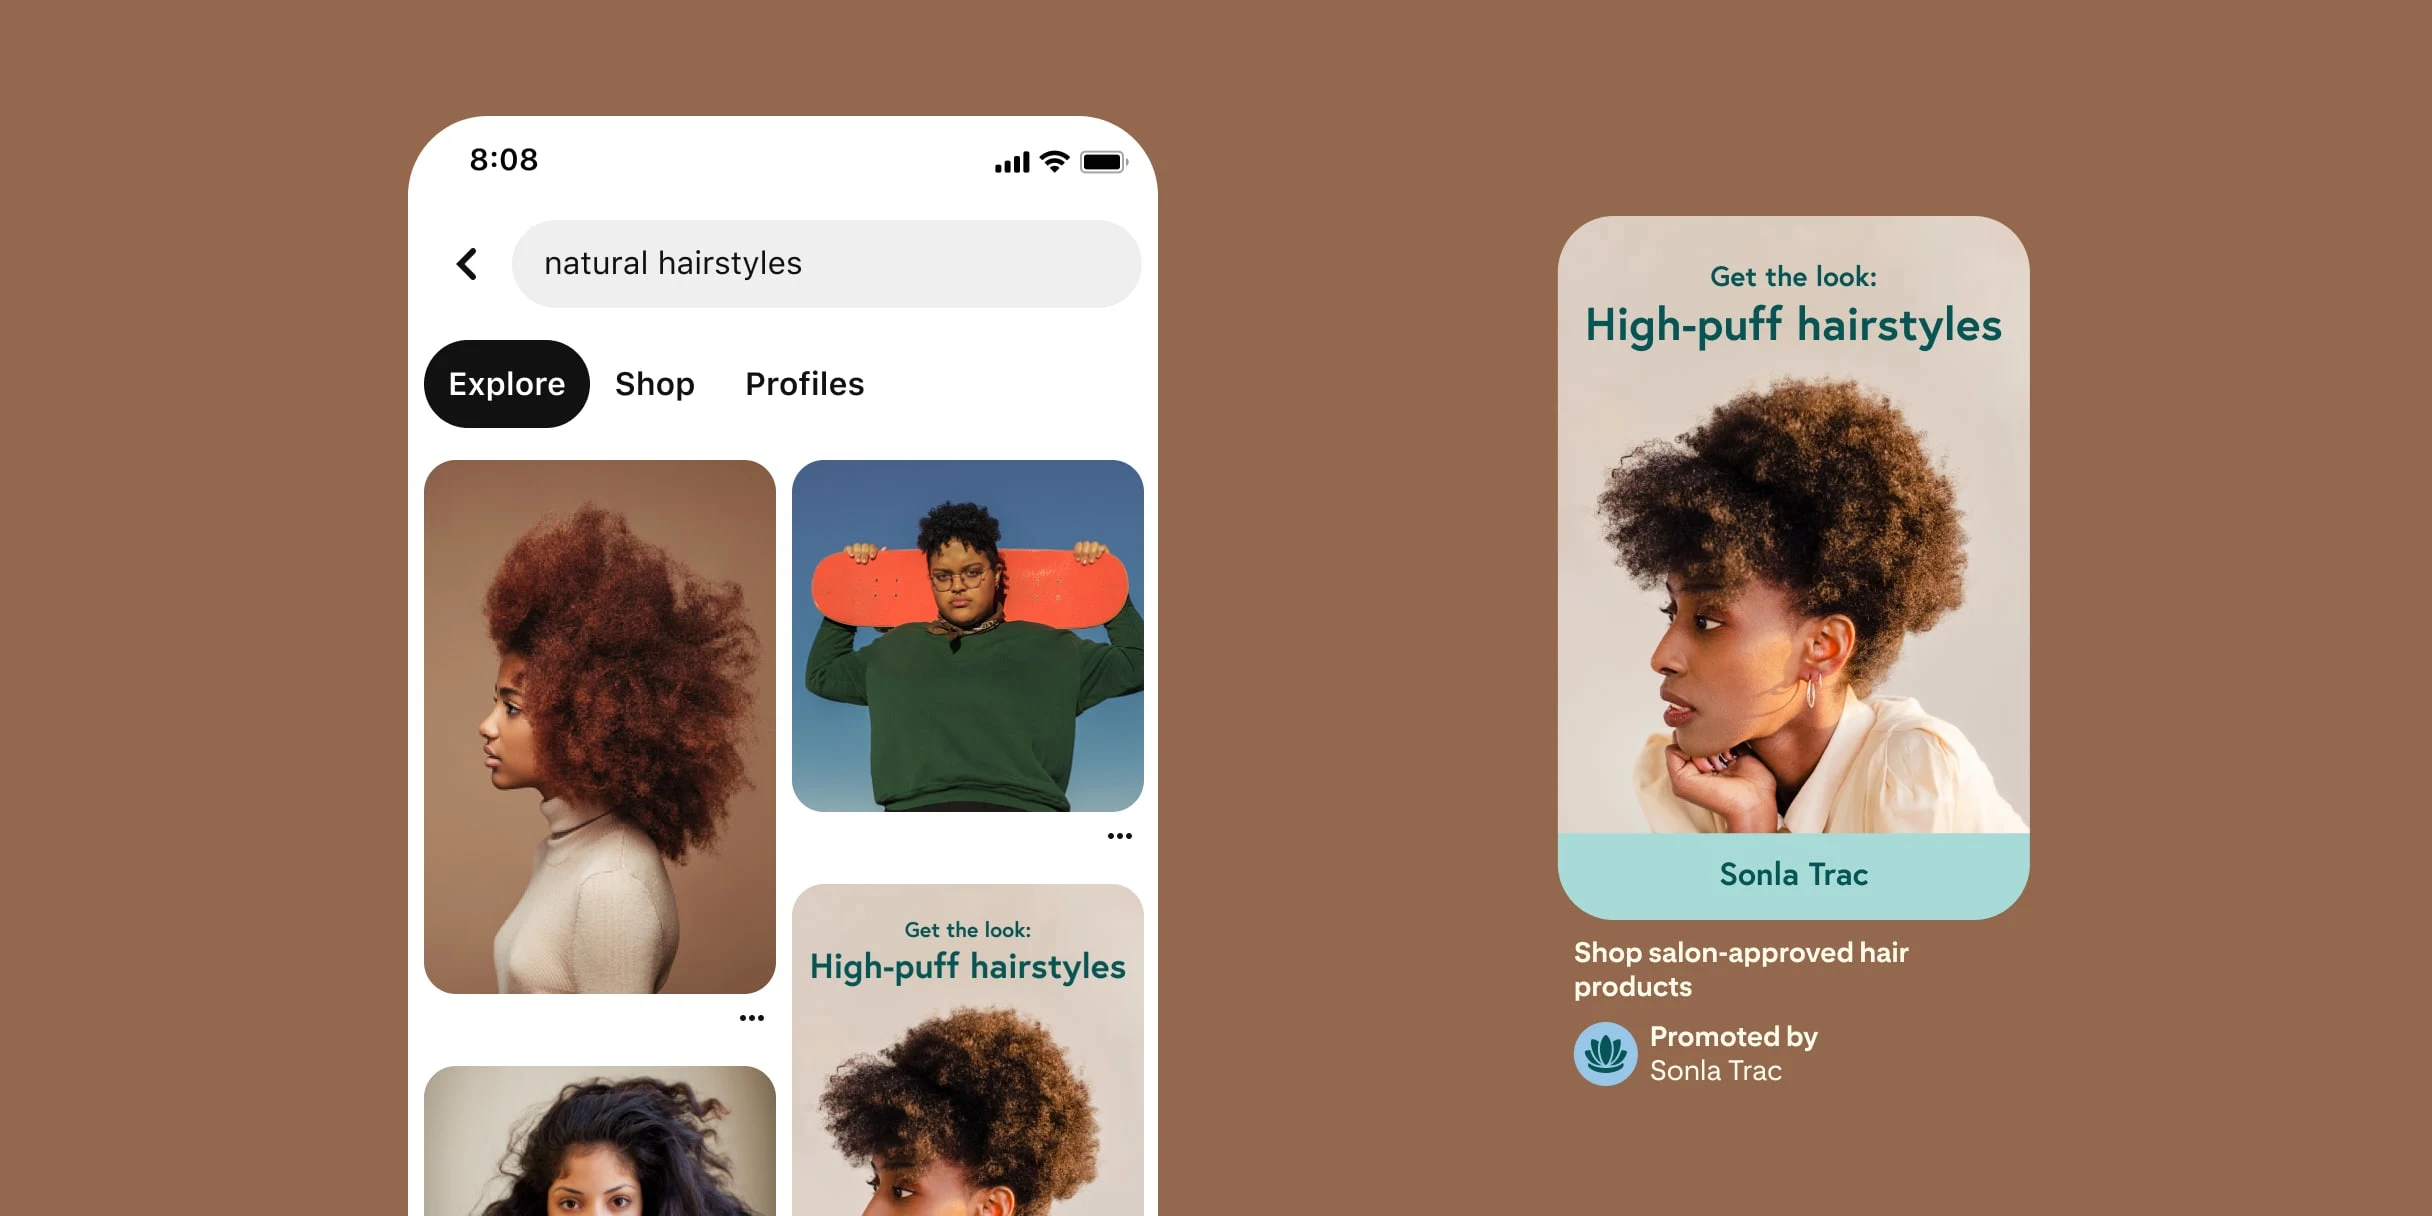 Pinterest search results for natural hairstyles. Black women with different skin tones. Red, black, dark brown and blonde hair. Brown and gray backdrops at left. Woman holds an orange skateboard. Pin of a Black woman with brown natural hairstyle, in front of a brown background. Text reads get the look: high-puff hairstyles, Sonla Trac. Description reads shop salon-approved hair products.
